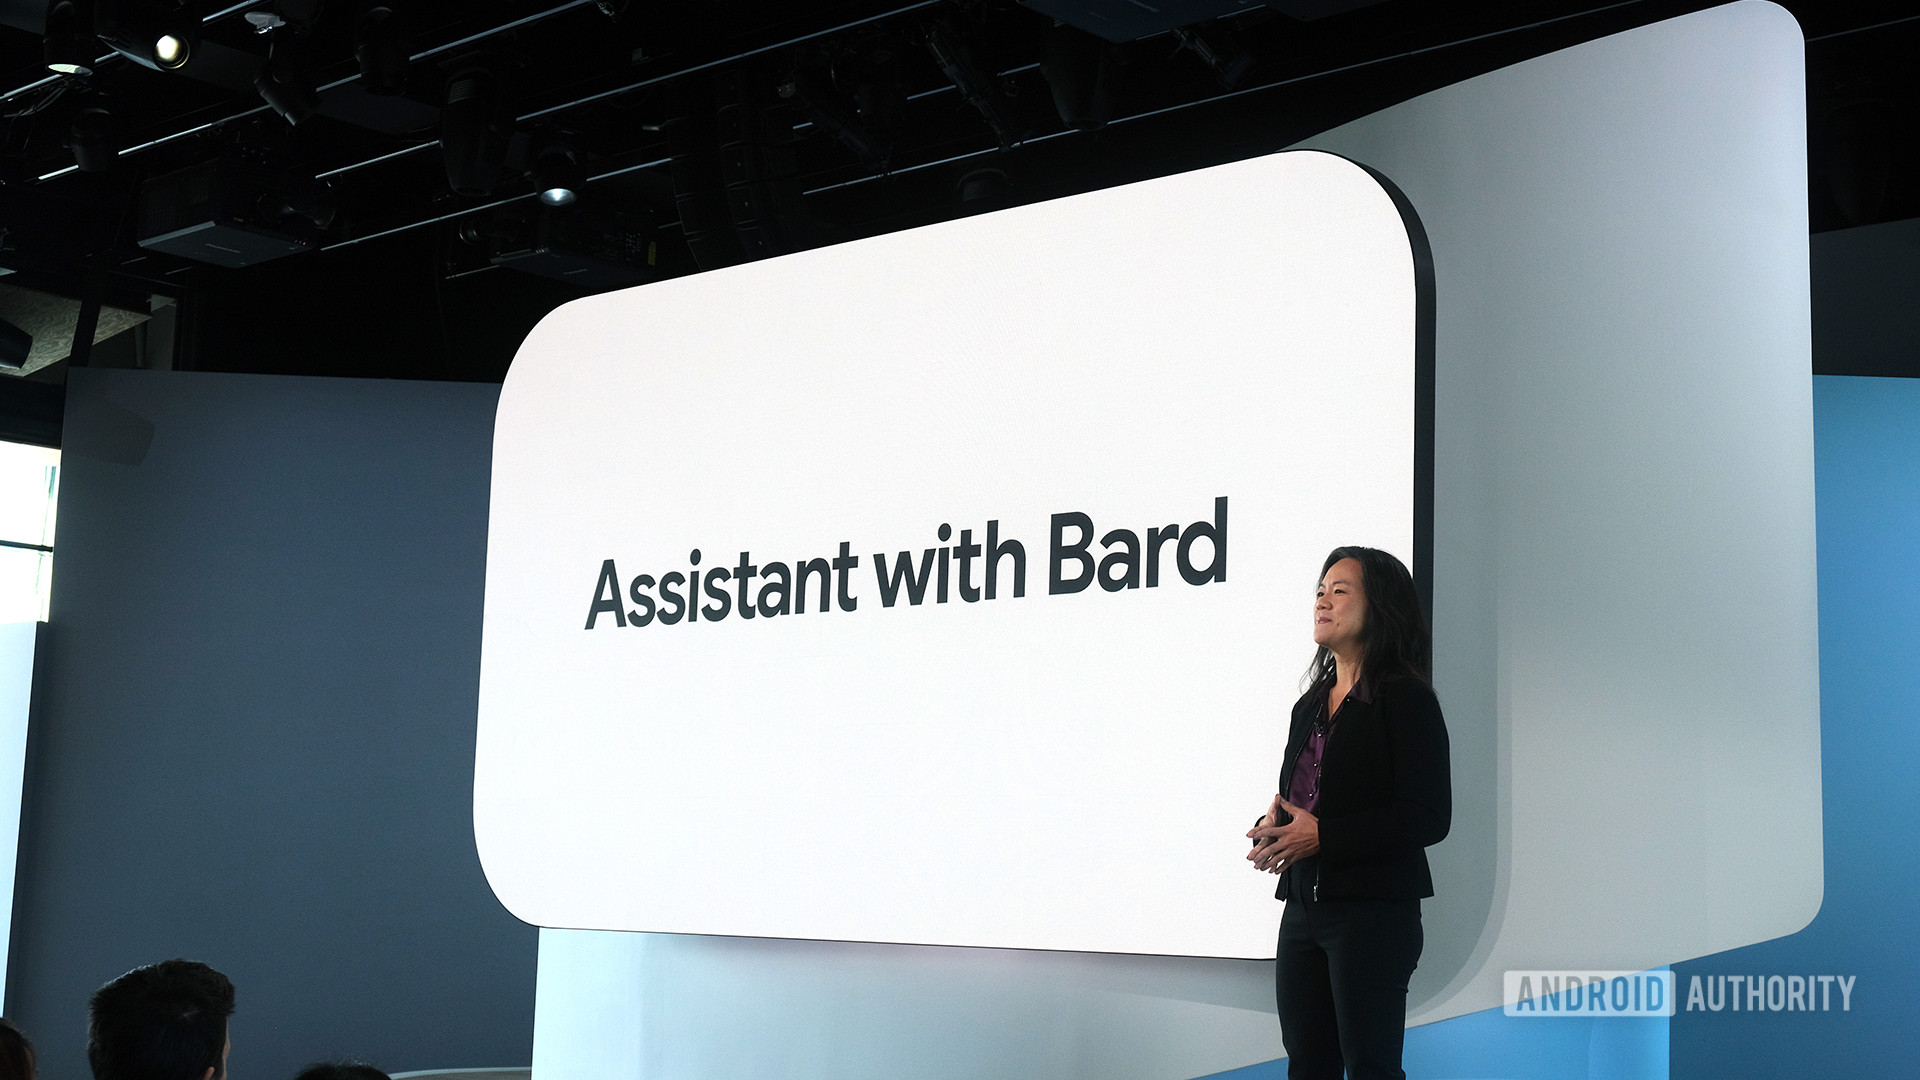 This is what Google Assistant will look like with Bard on Android